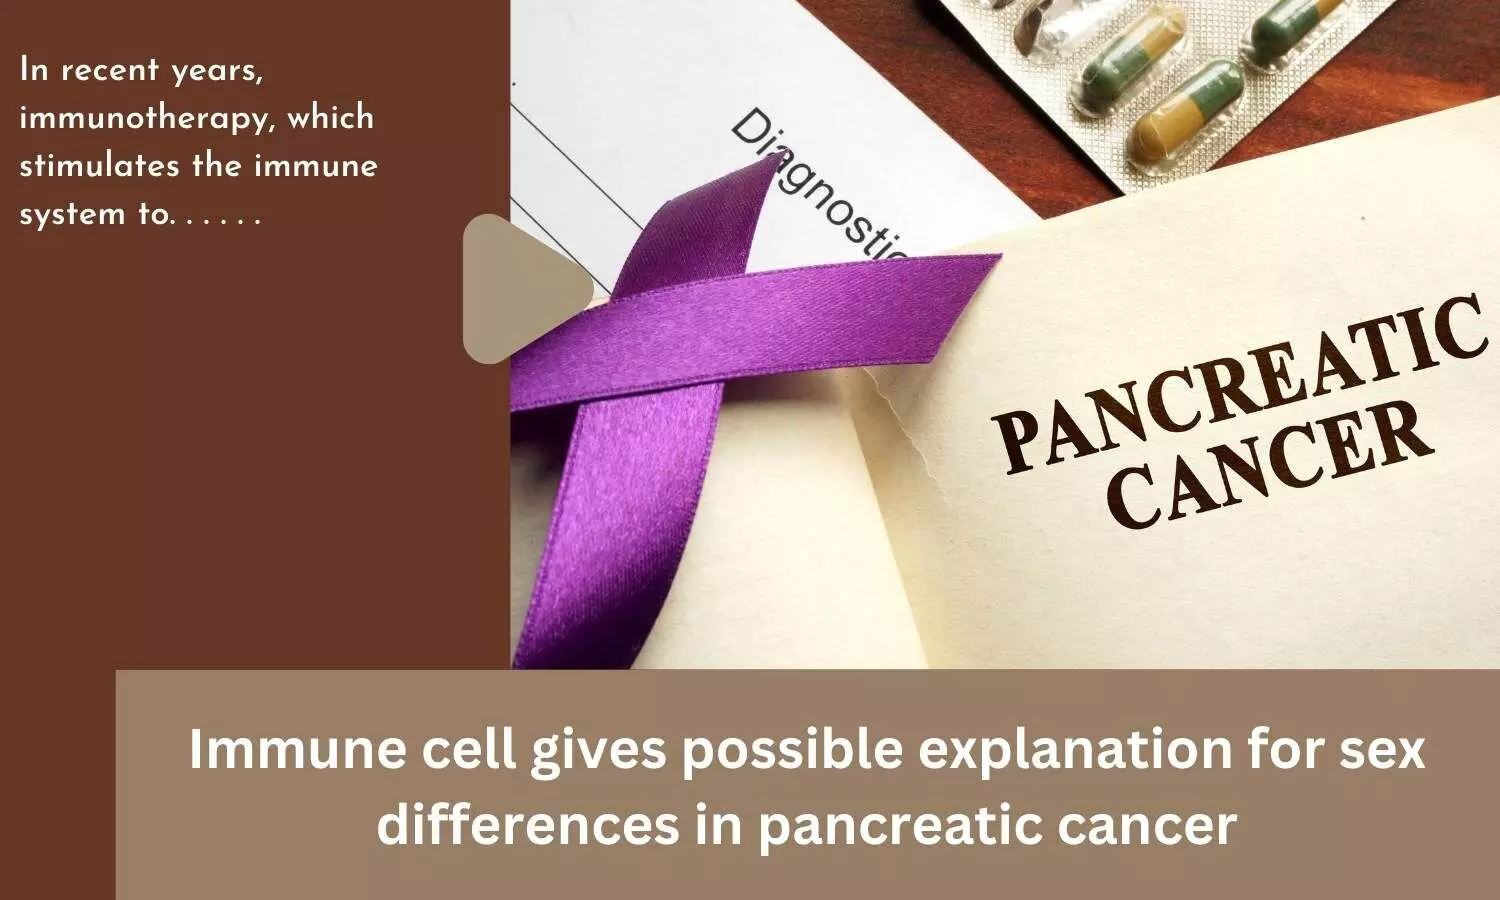 Immune cell gives possible explanation for sex differences in pancreatic cancer